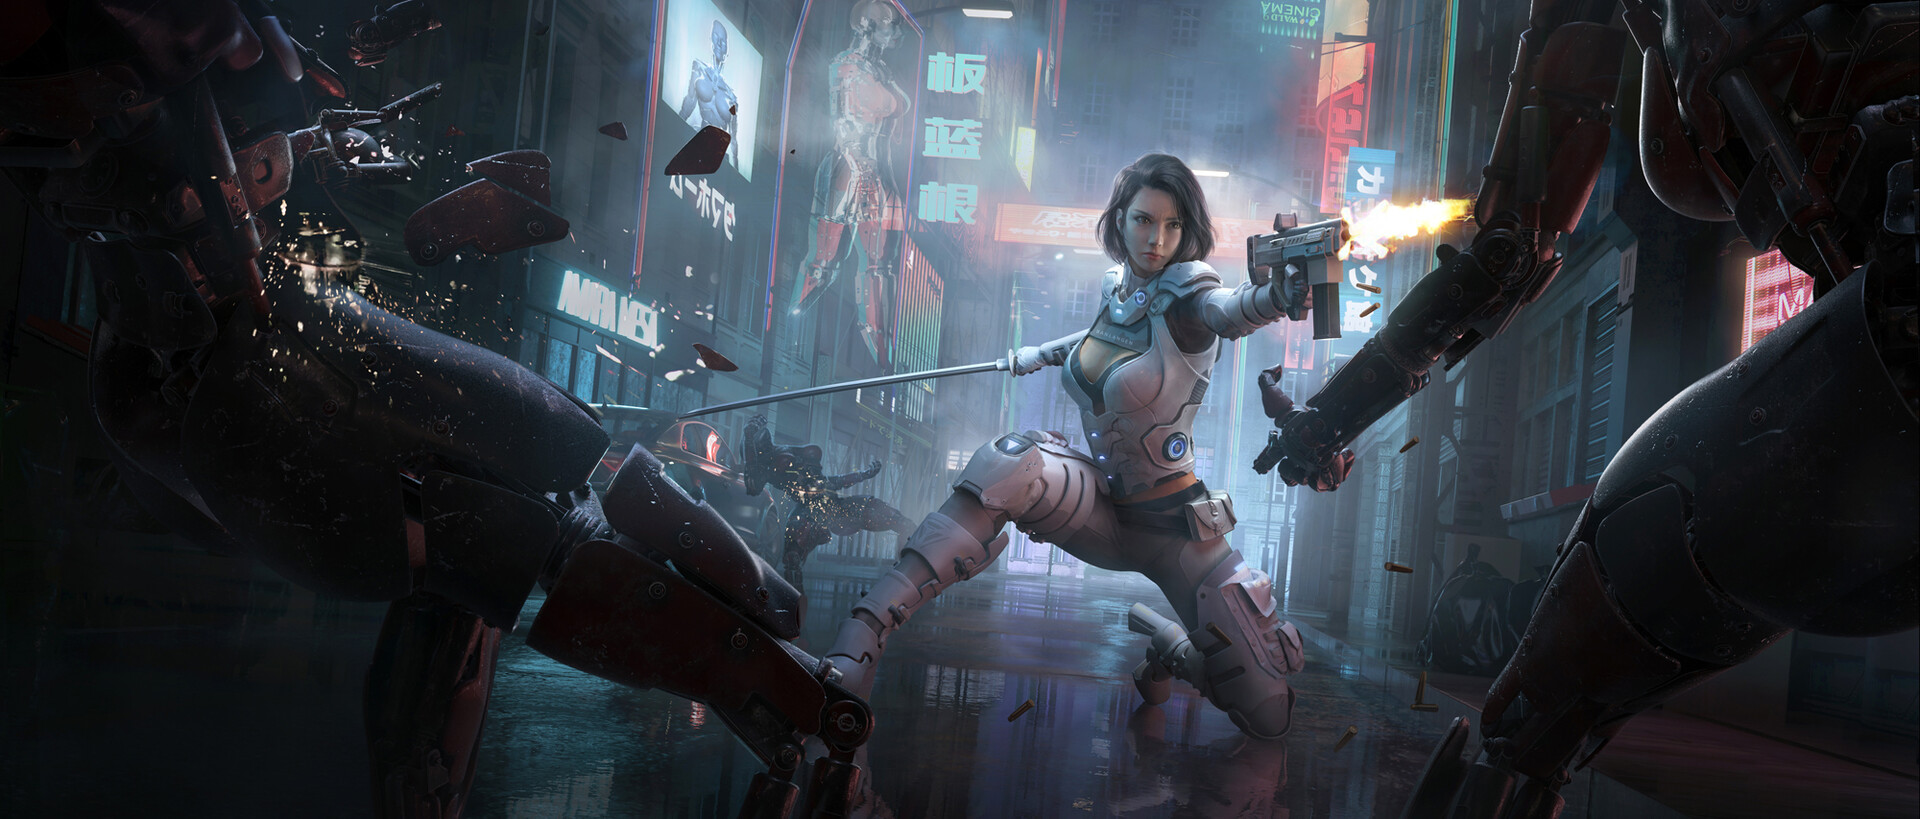 General 1920x819 women science fiction artwork futuristic women with swords girls with guns weapon science fiction women Song (artist)